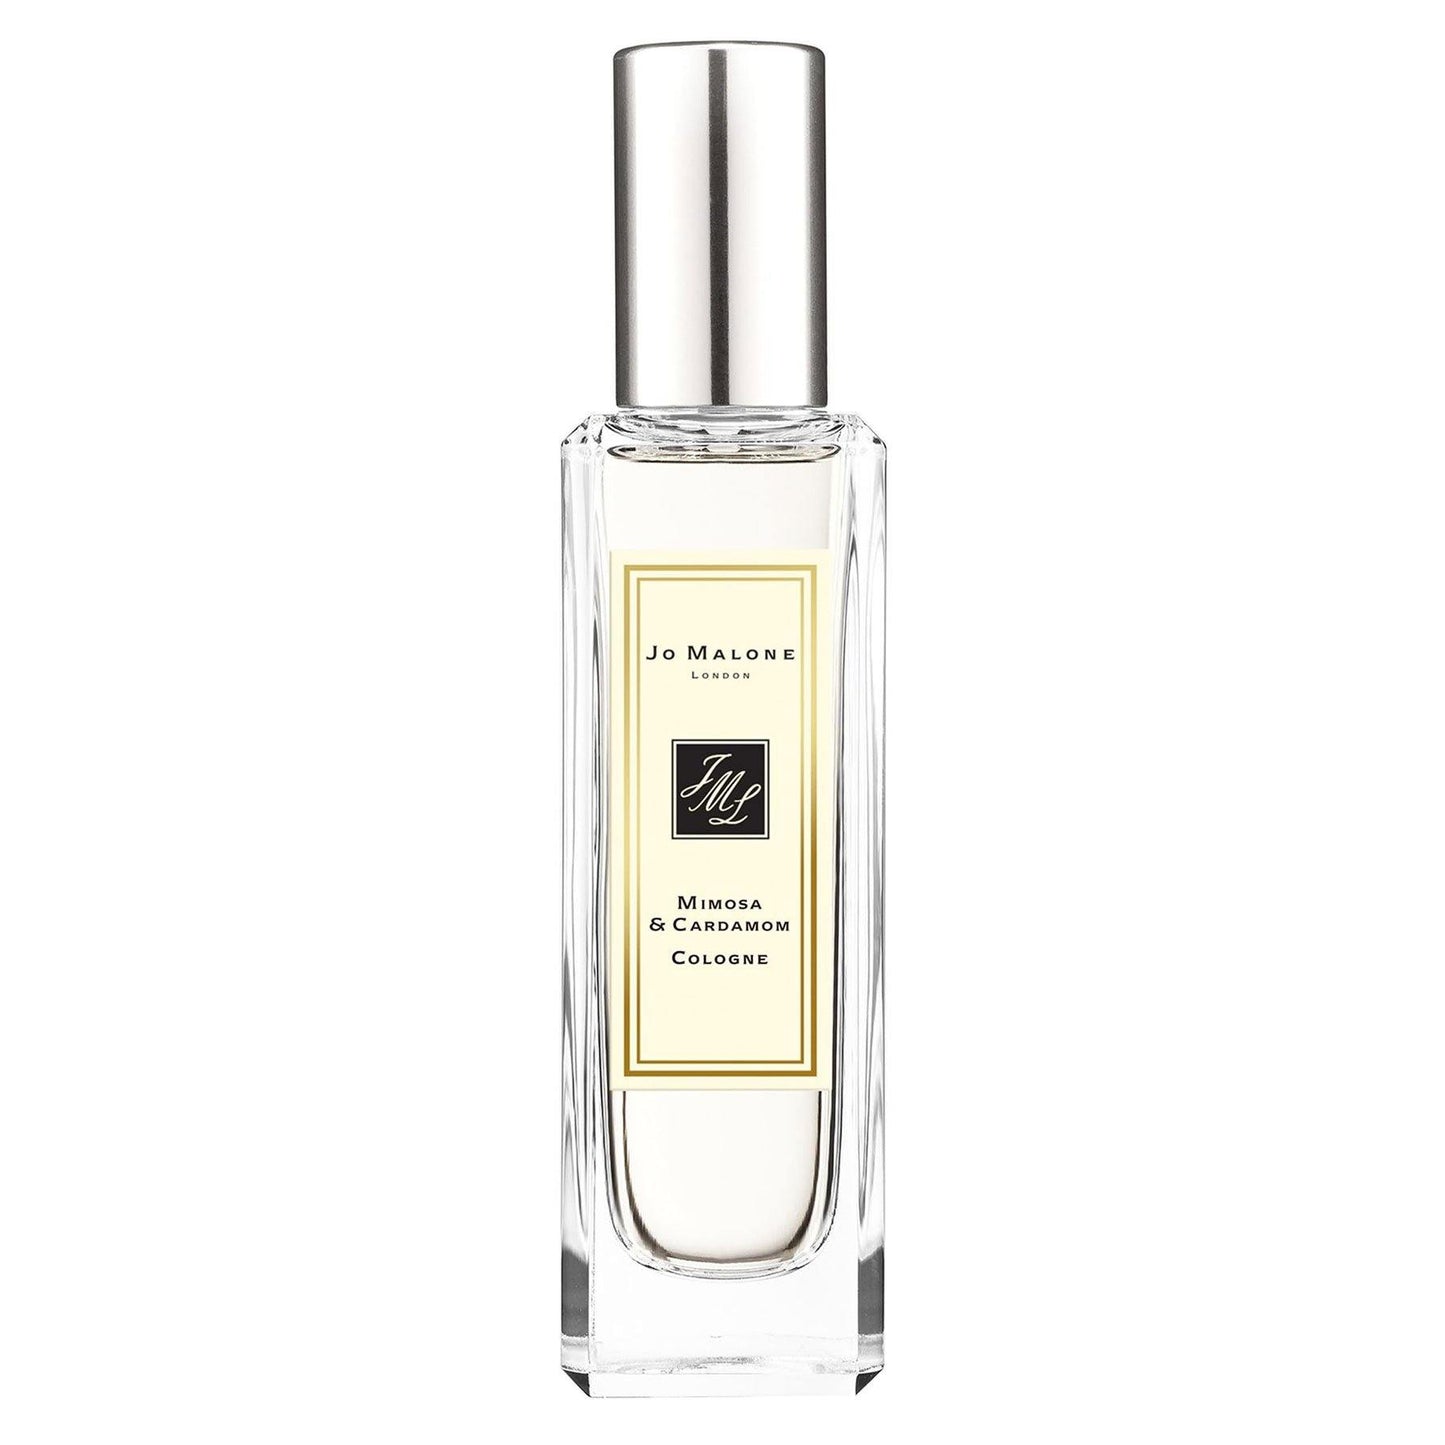 Mimosa & Cardamom Cologne - Cosmos Boutique New Jersey